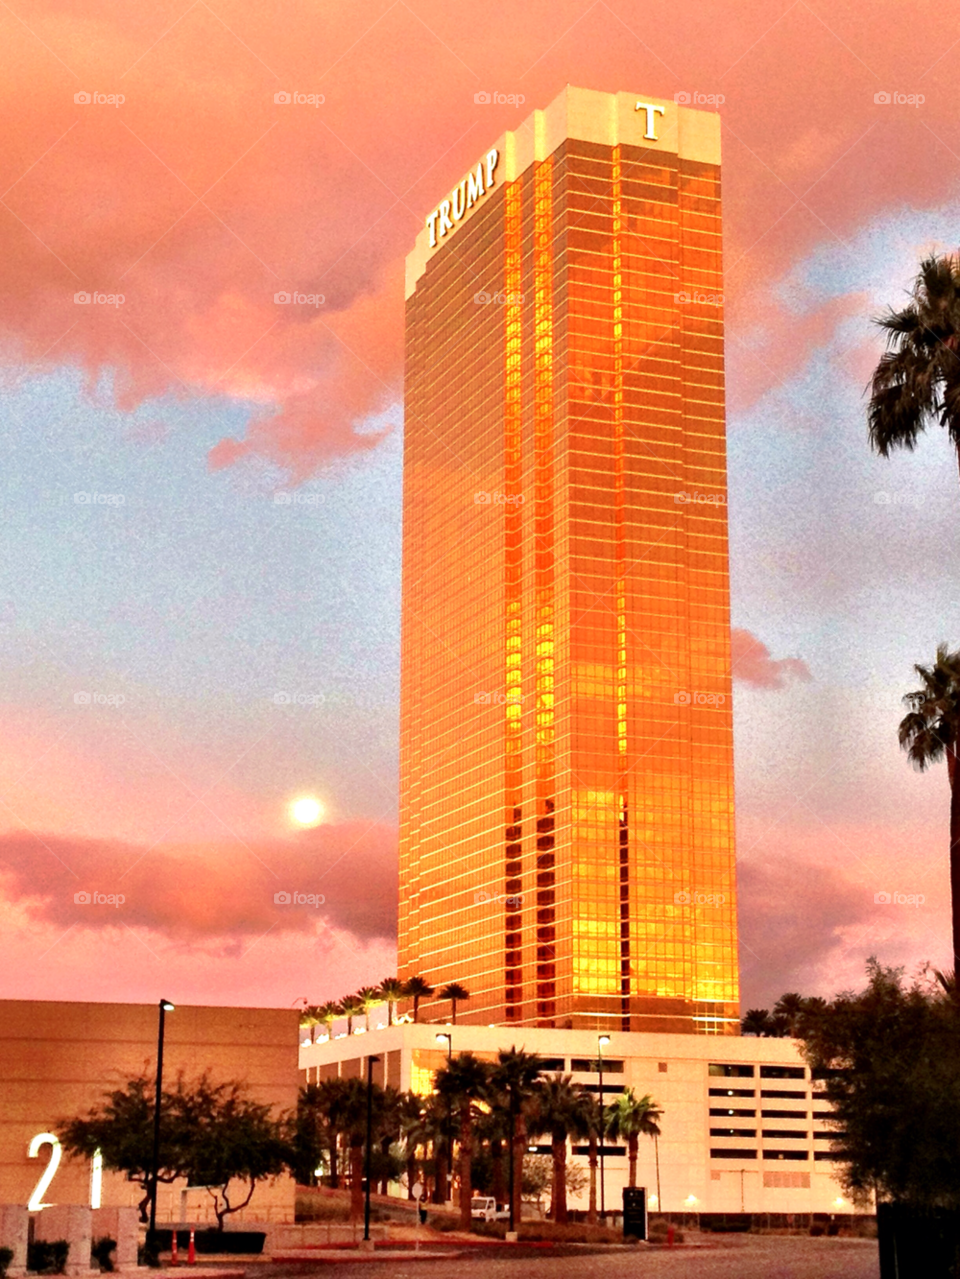 las vegas morning clouds hotel by bcpix